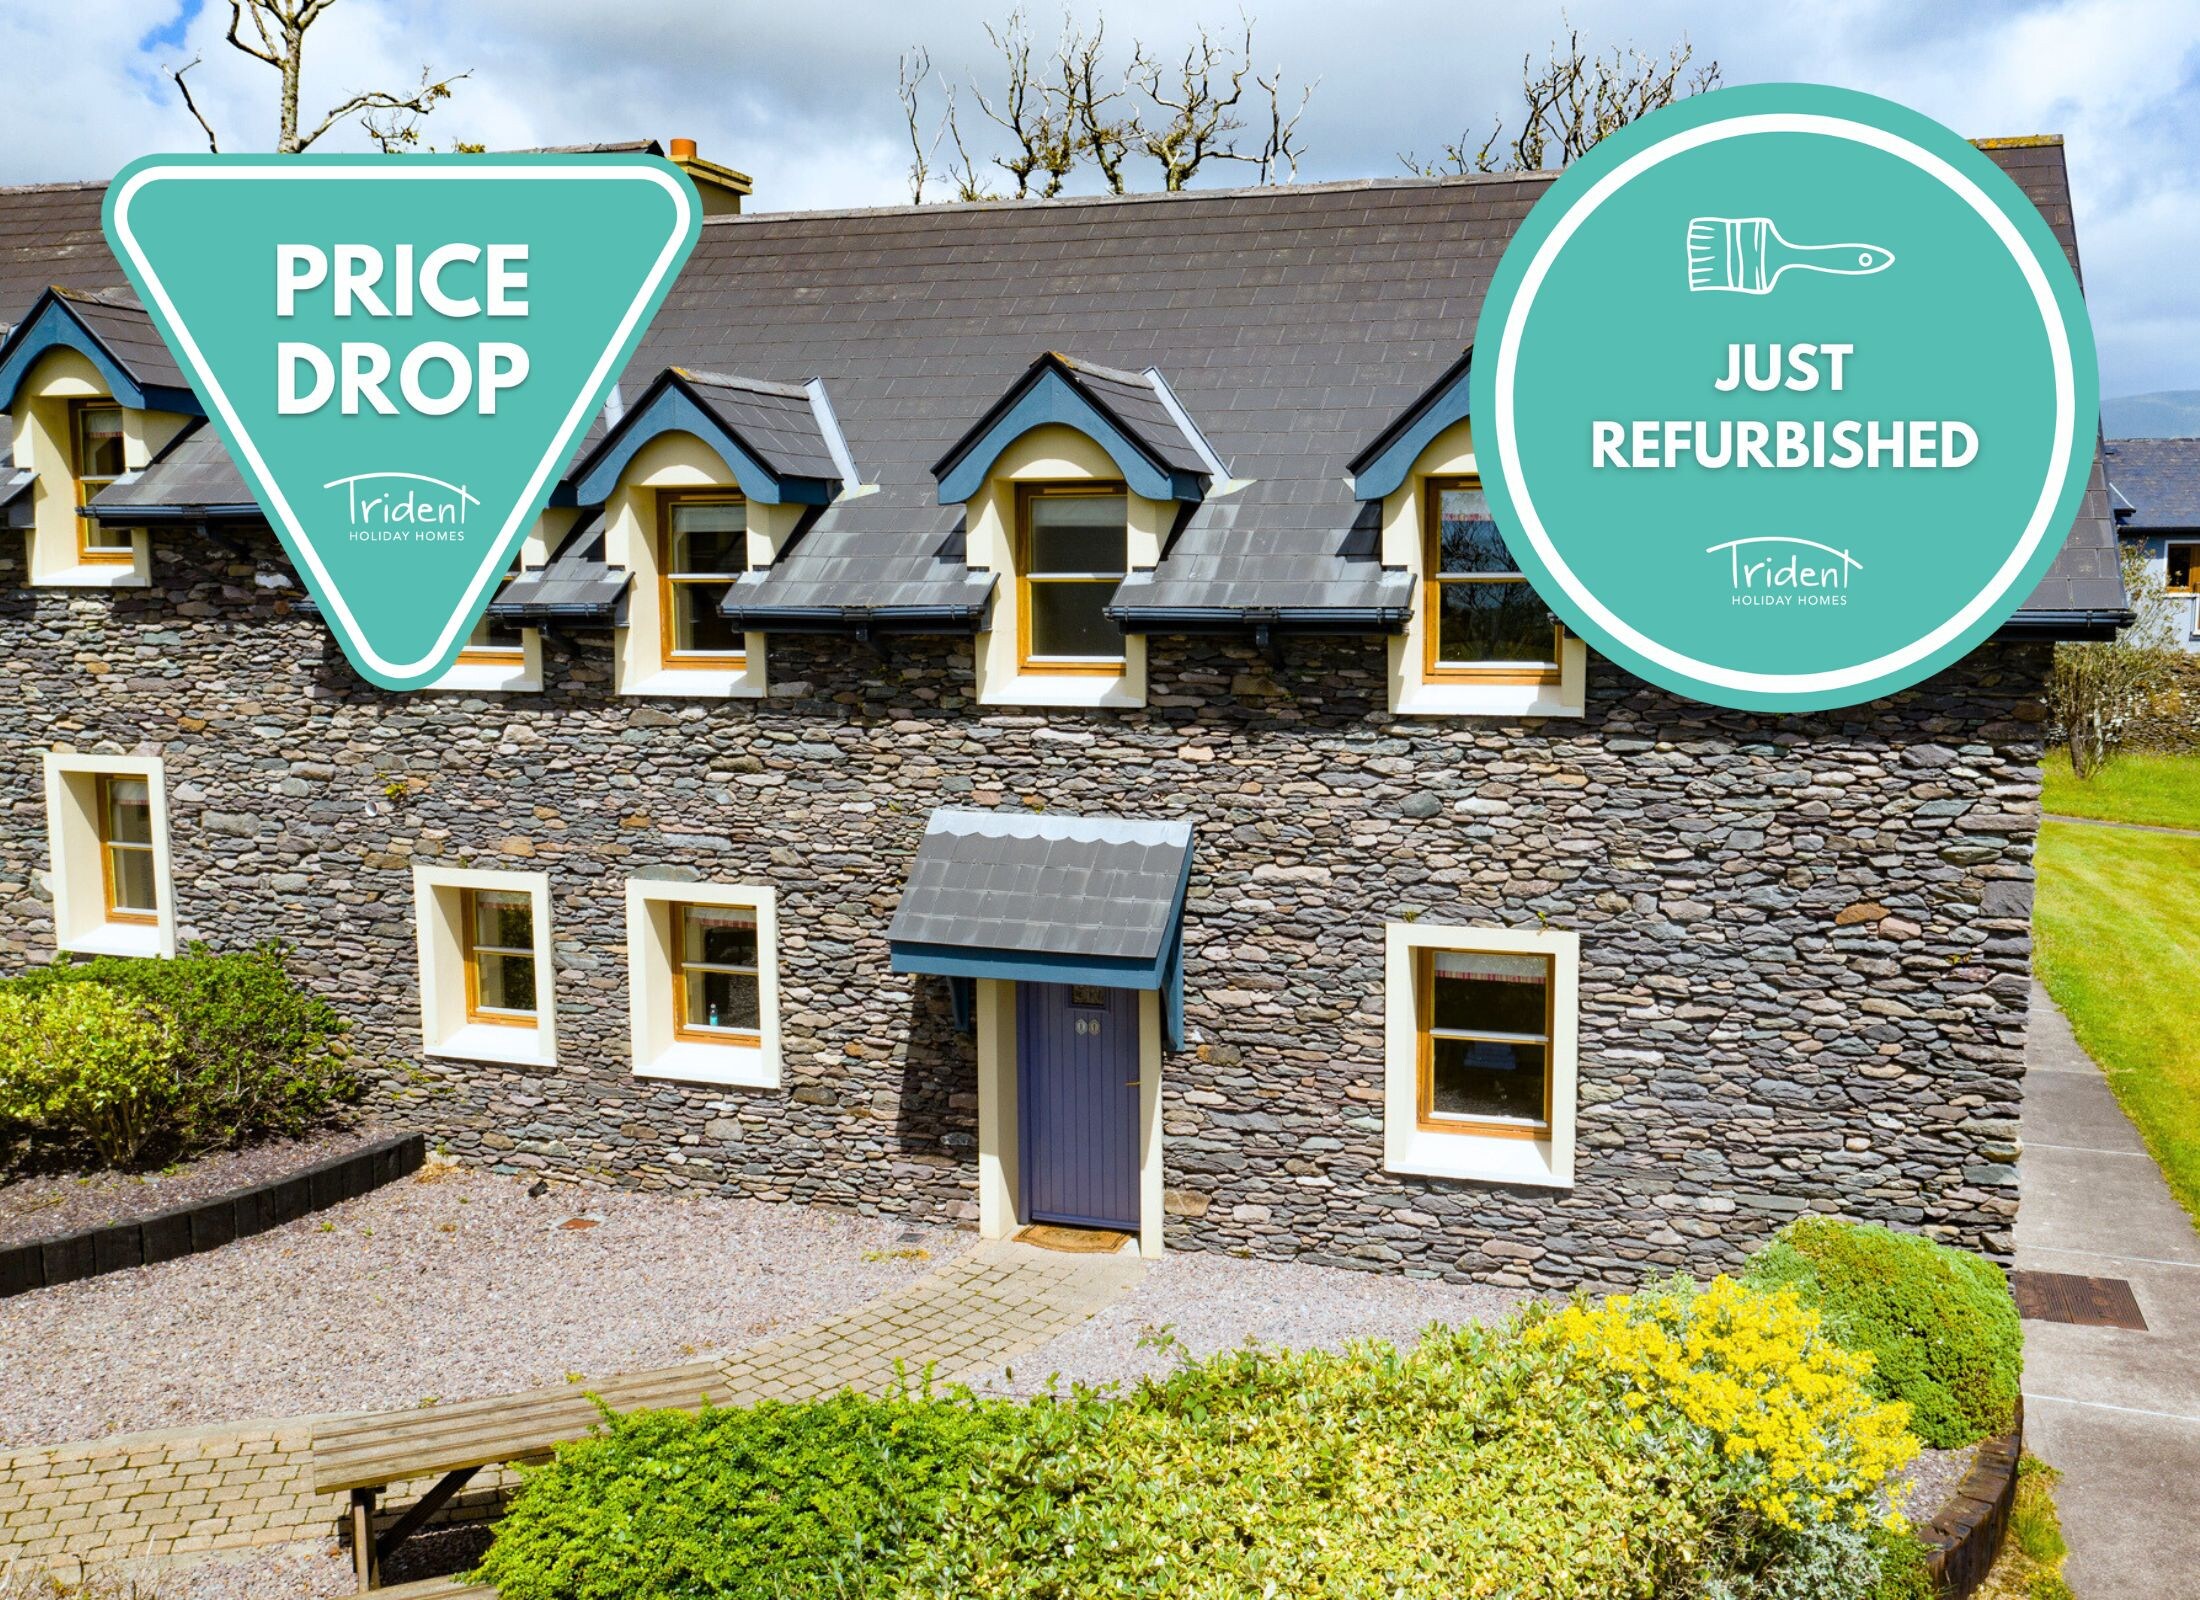 
Dingle Courtyard Cottages, Cluster of Self-Catering Holiday Homes in Dingle, County Kerry